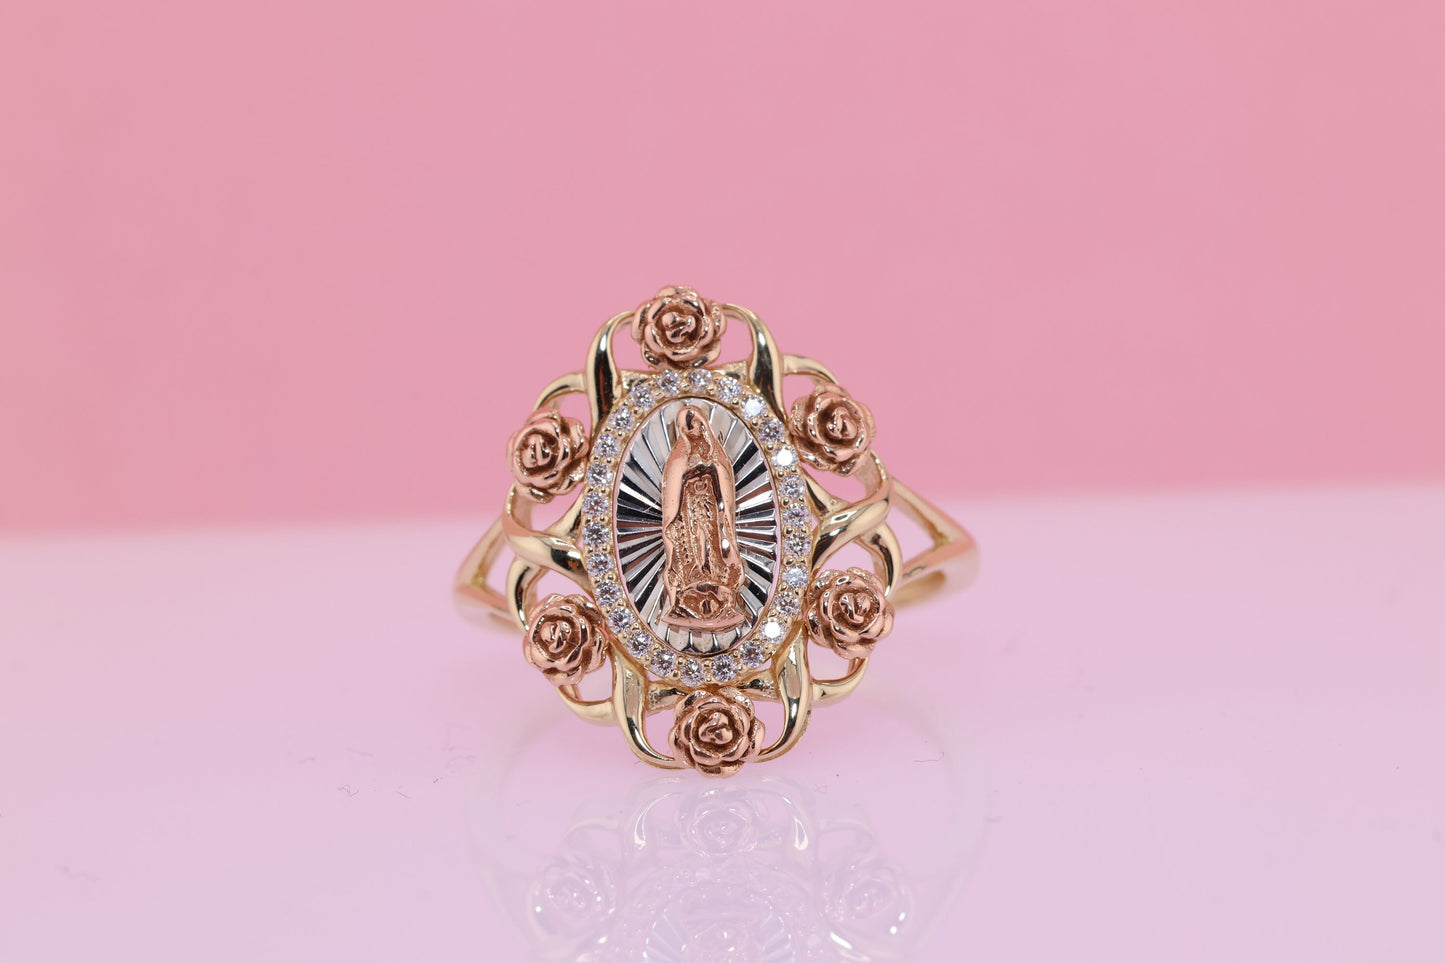 14k Solid Gold Virgin Mary Virgen Maria Lady Guadalupe Ring X